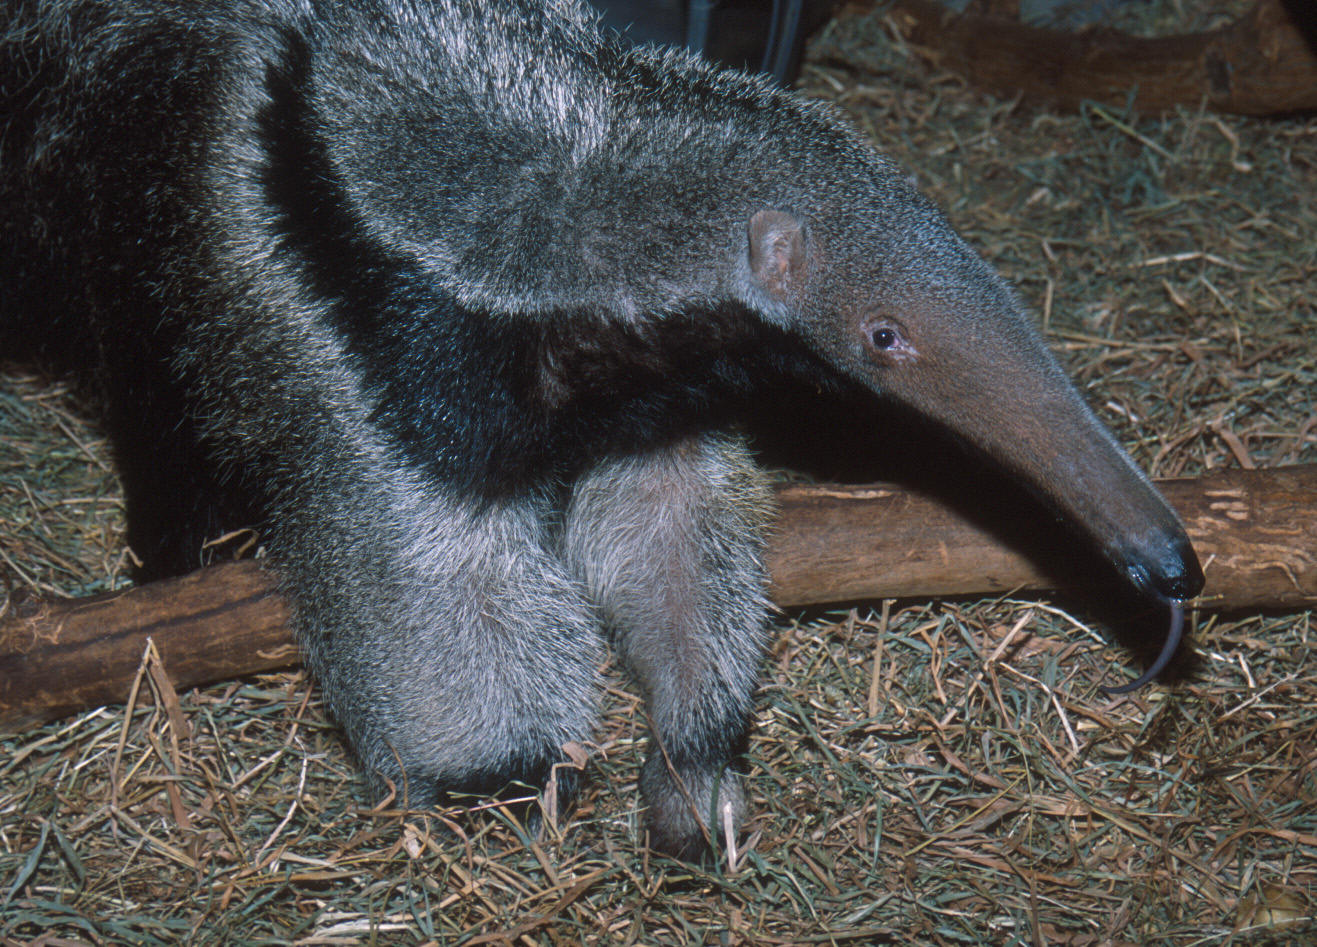 Giant Anteater Adaptations